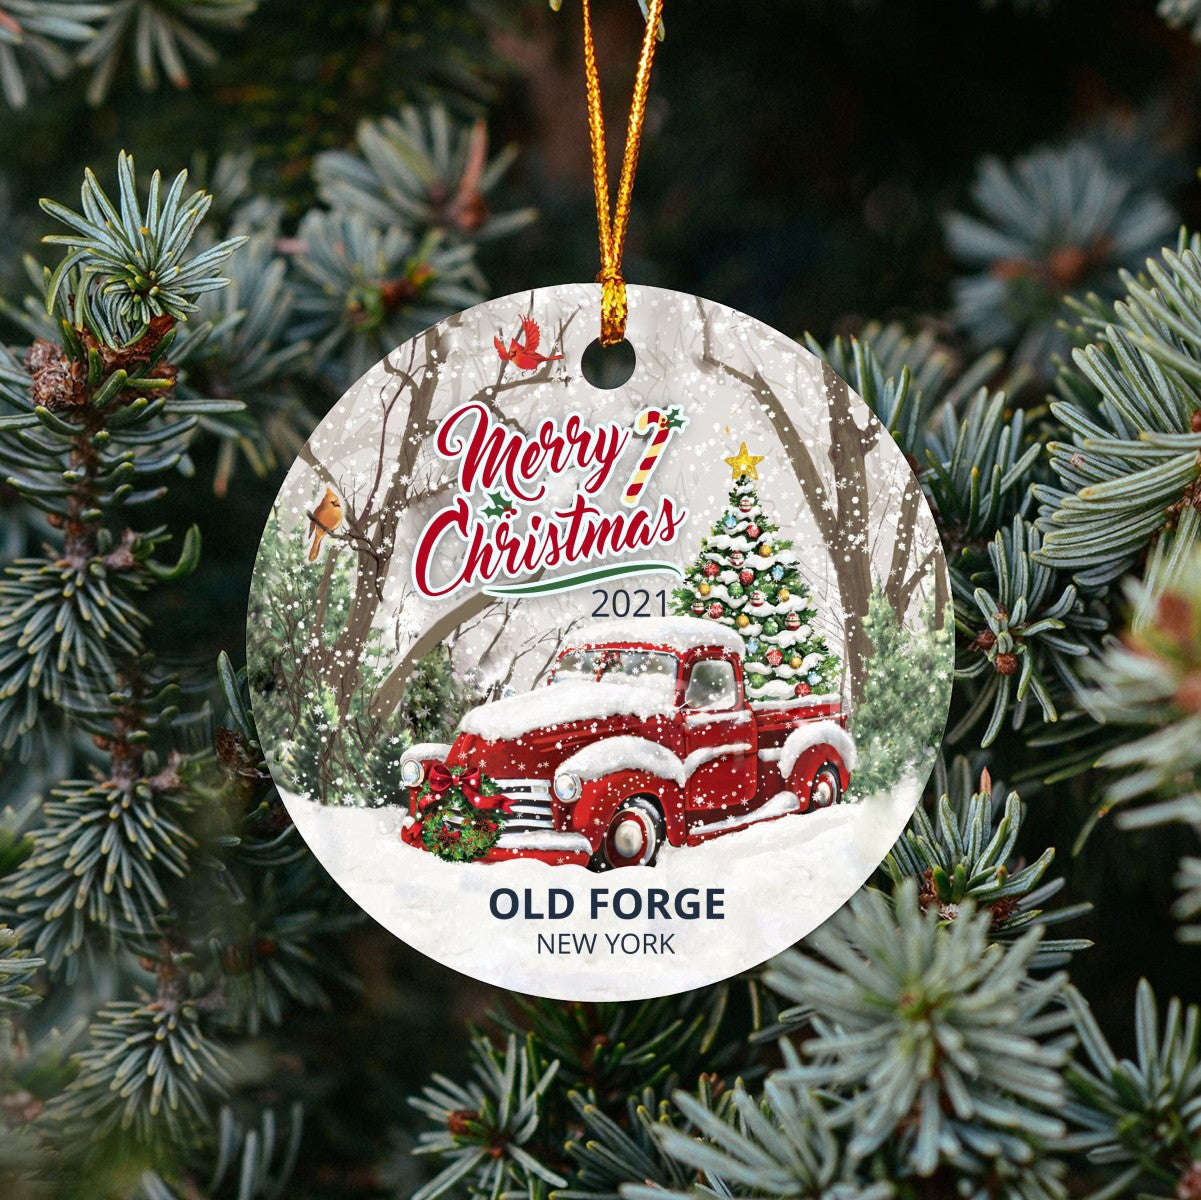 Christmas Tree Ornaments Old Forge - Ornament With Name City, State Old Forge New York NY Ornament - Red Truck Xmas Ornaments 3'' Plastic Gift For Family, Friend And Housewarming